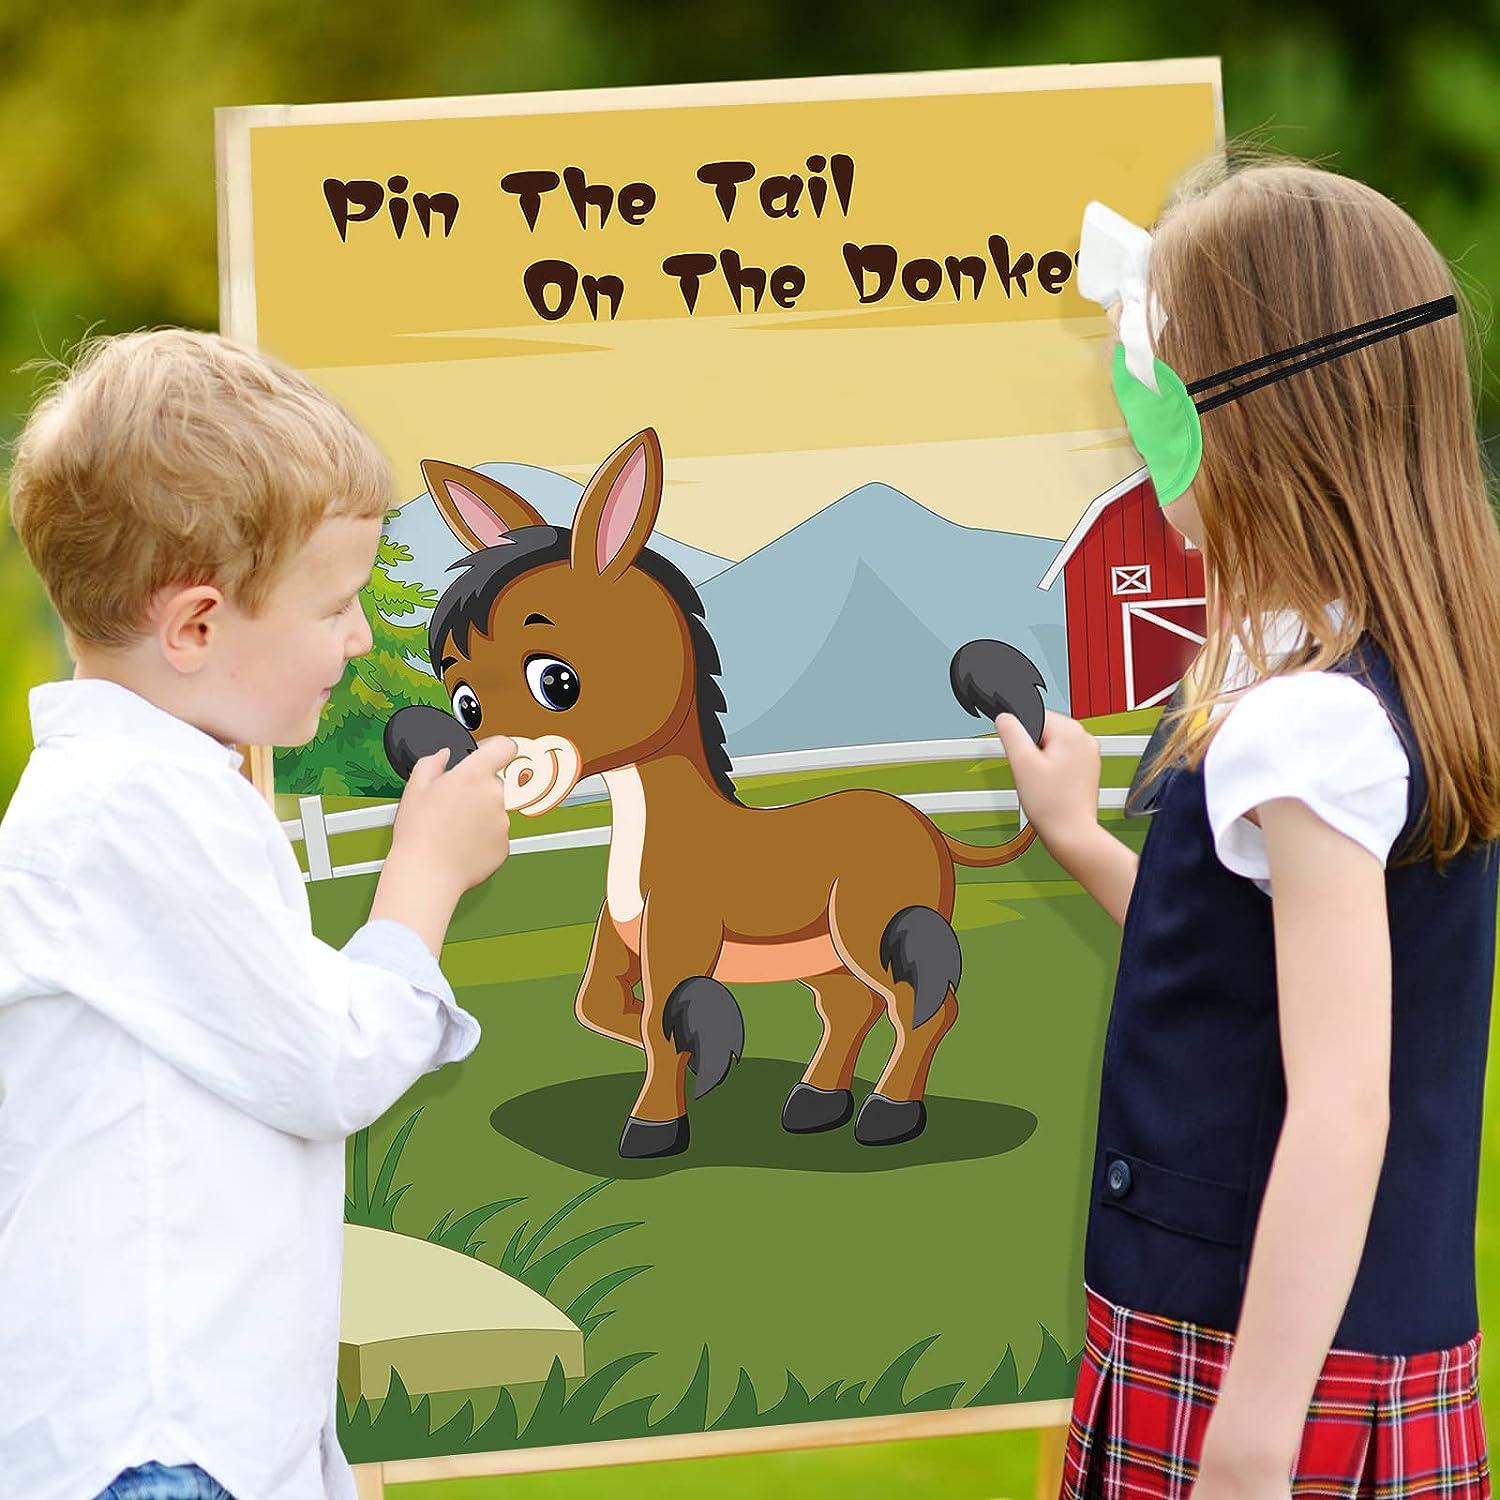 kids playing pin the tail on the donkey